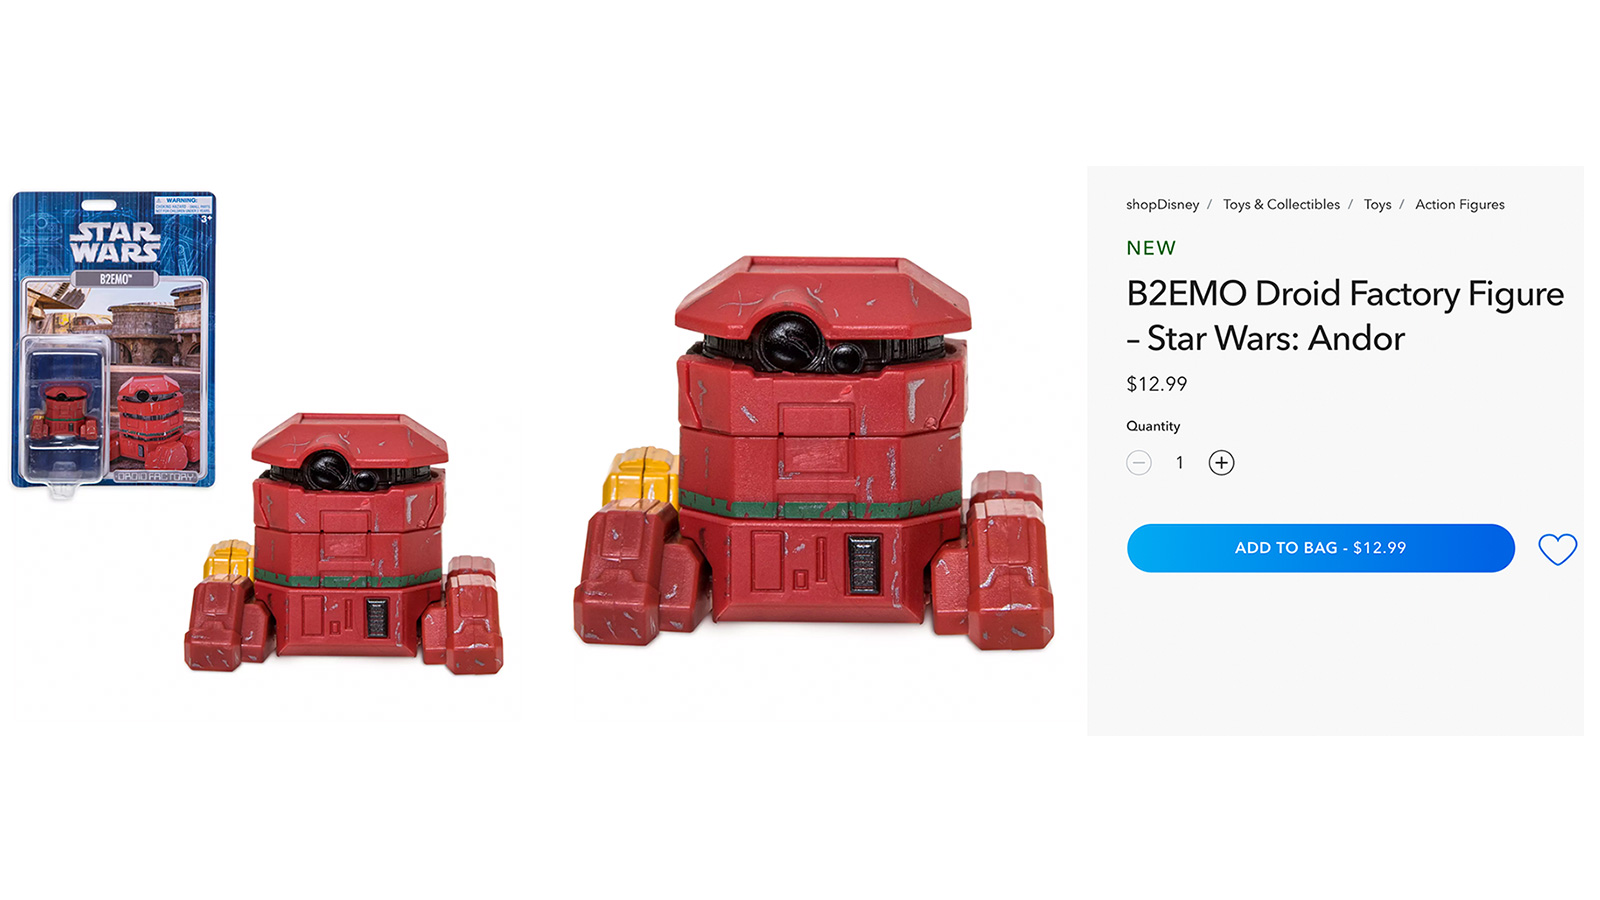 Back In Stock At Shop Disney - Exclusive Droid Factory B2EMO